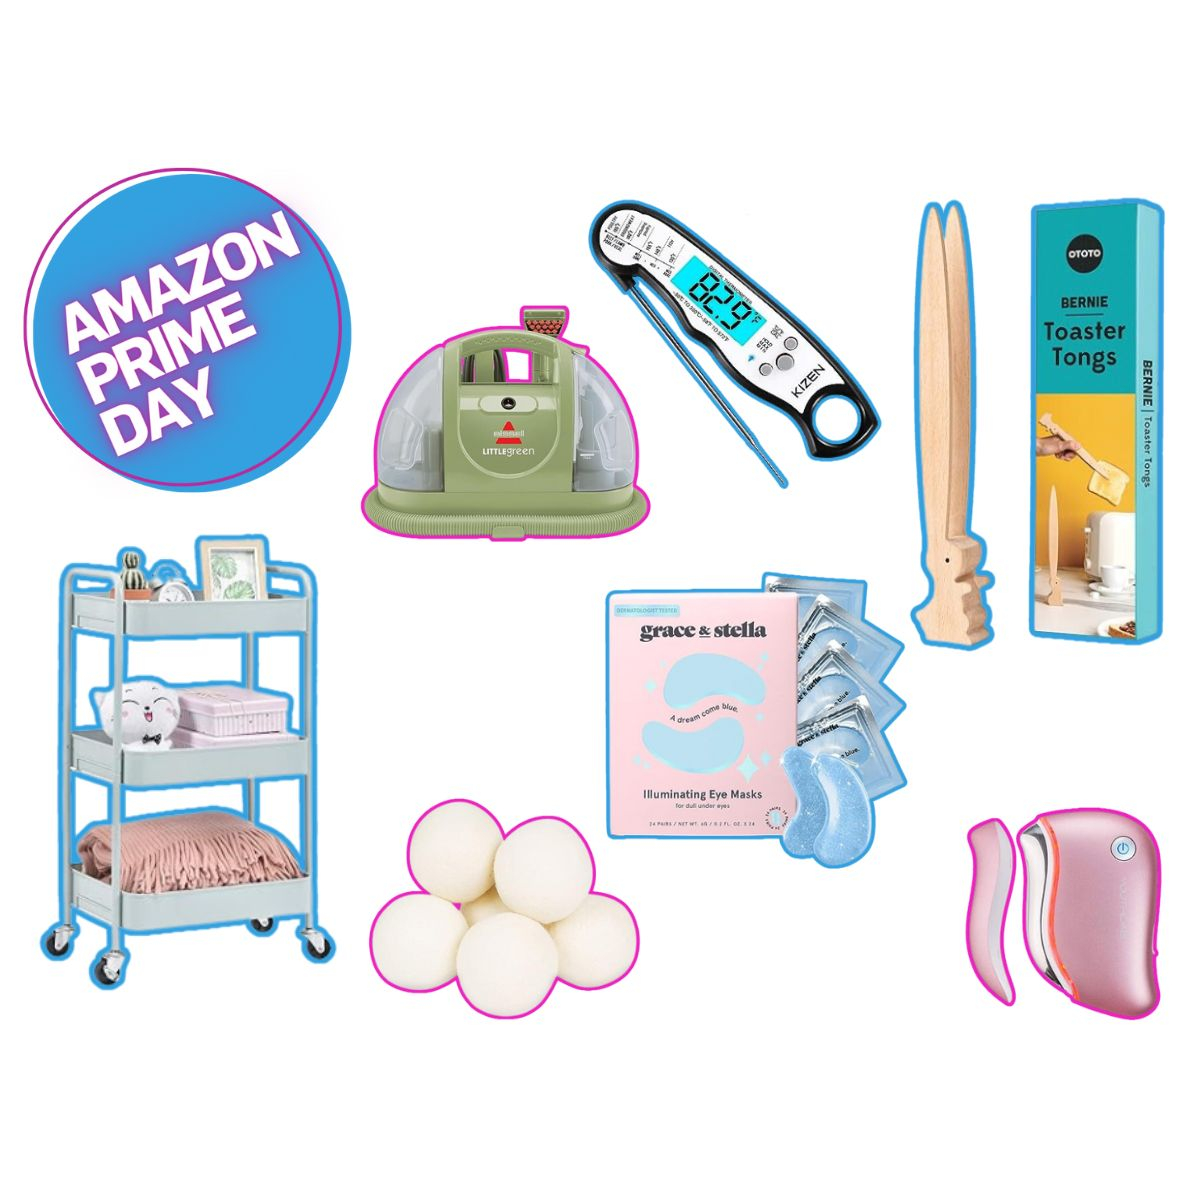 https://akns-images.eonline.com/eol_images/Entire_Site/2023911/rs_1200x1200-231011133002-Copy_of_Amazon_Prime_Day_Sticker_1200_x_1200_px_2.jpg?fit=around%7C1080:540&output-quality=90&crop=1080:540;center,top